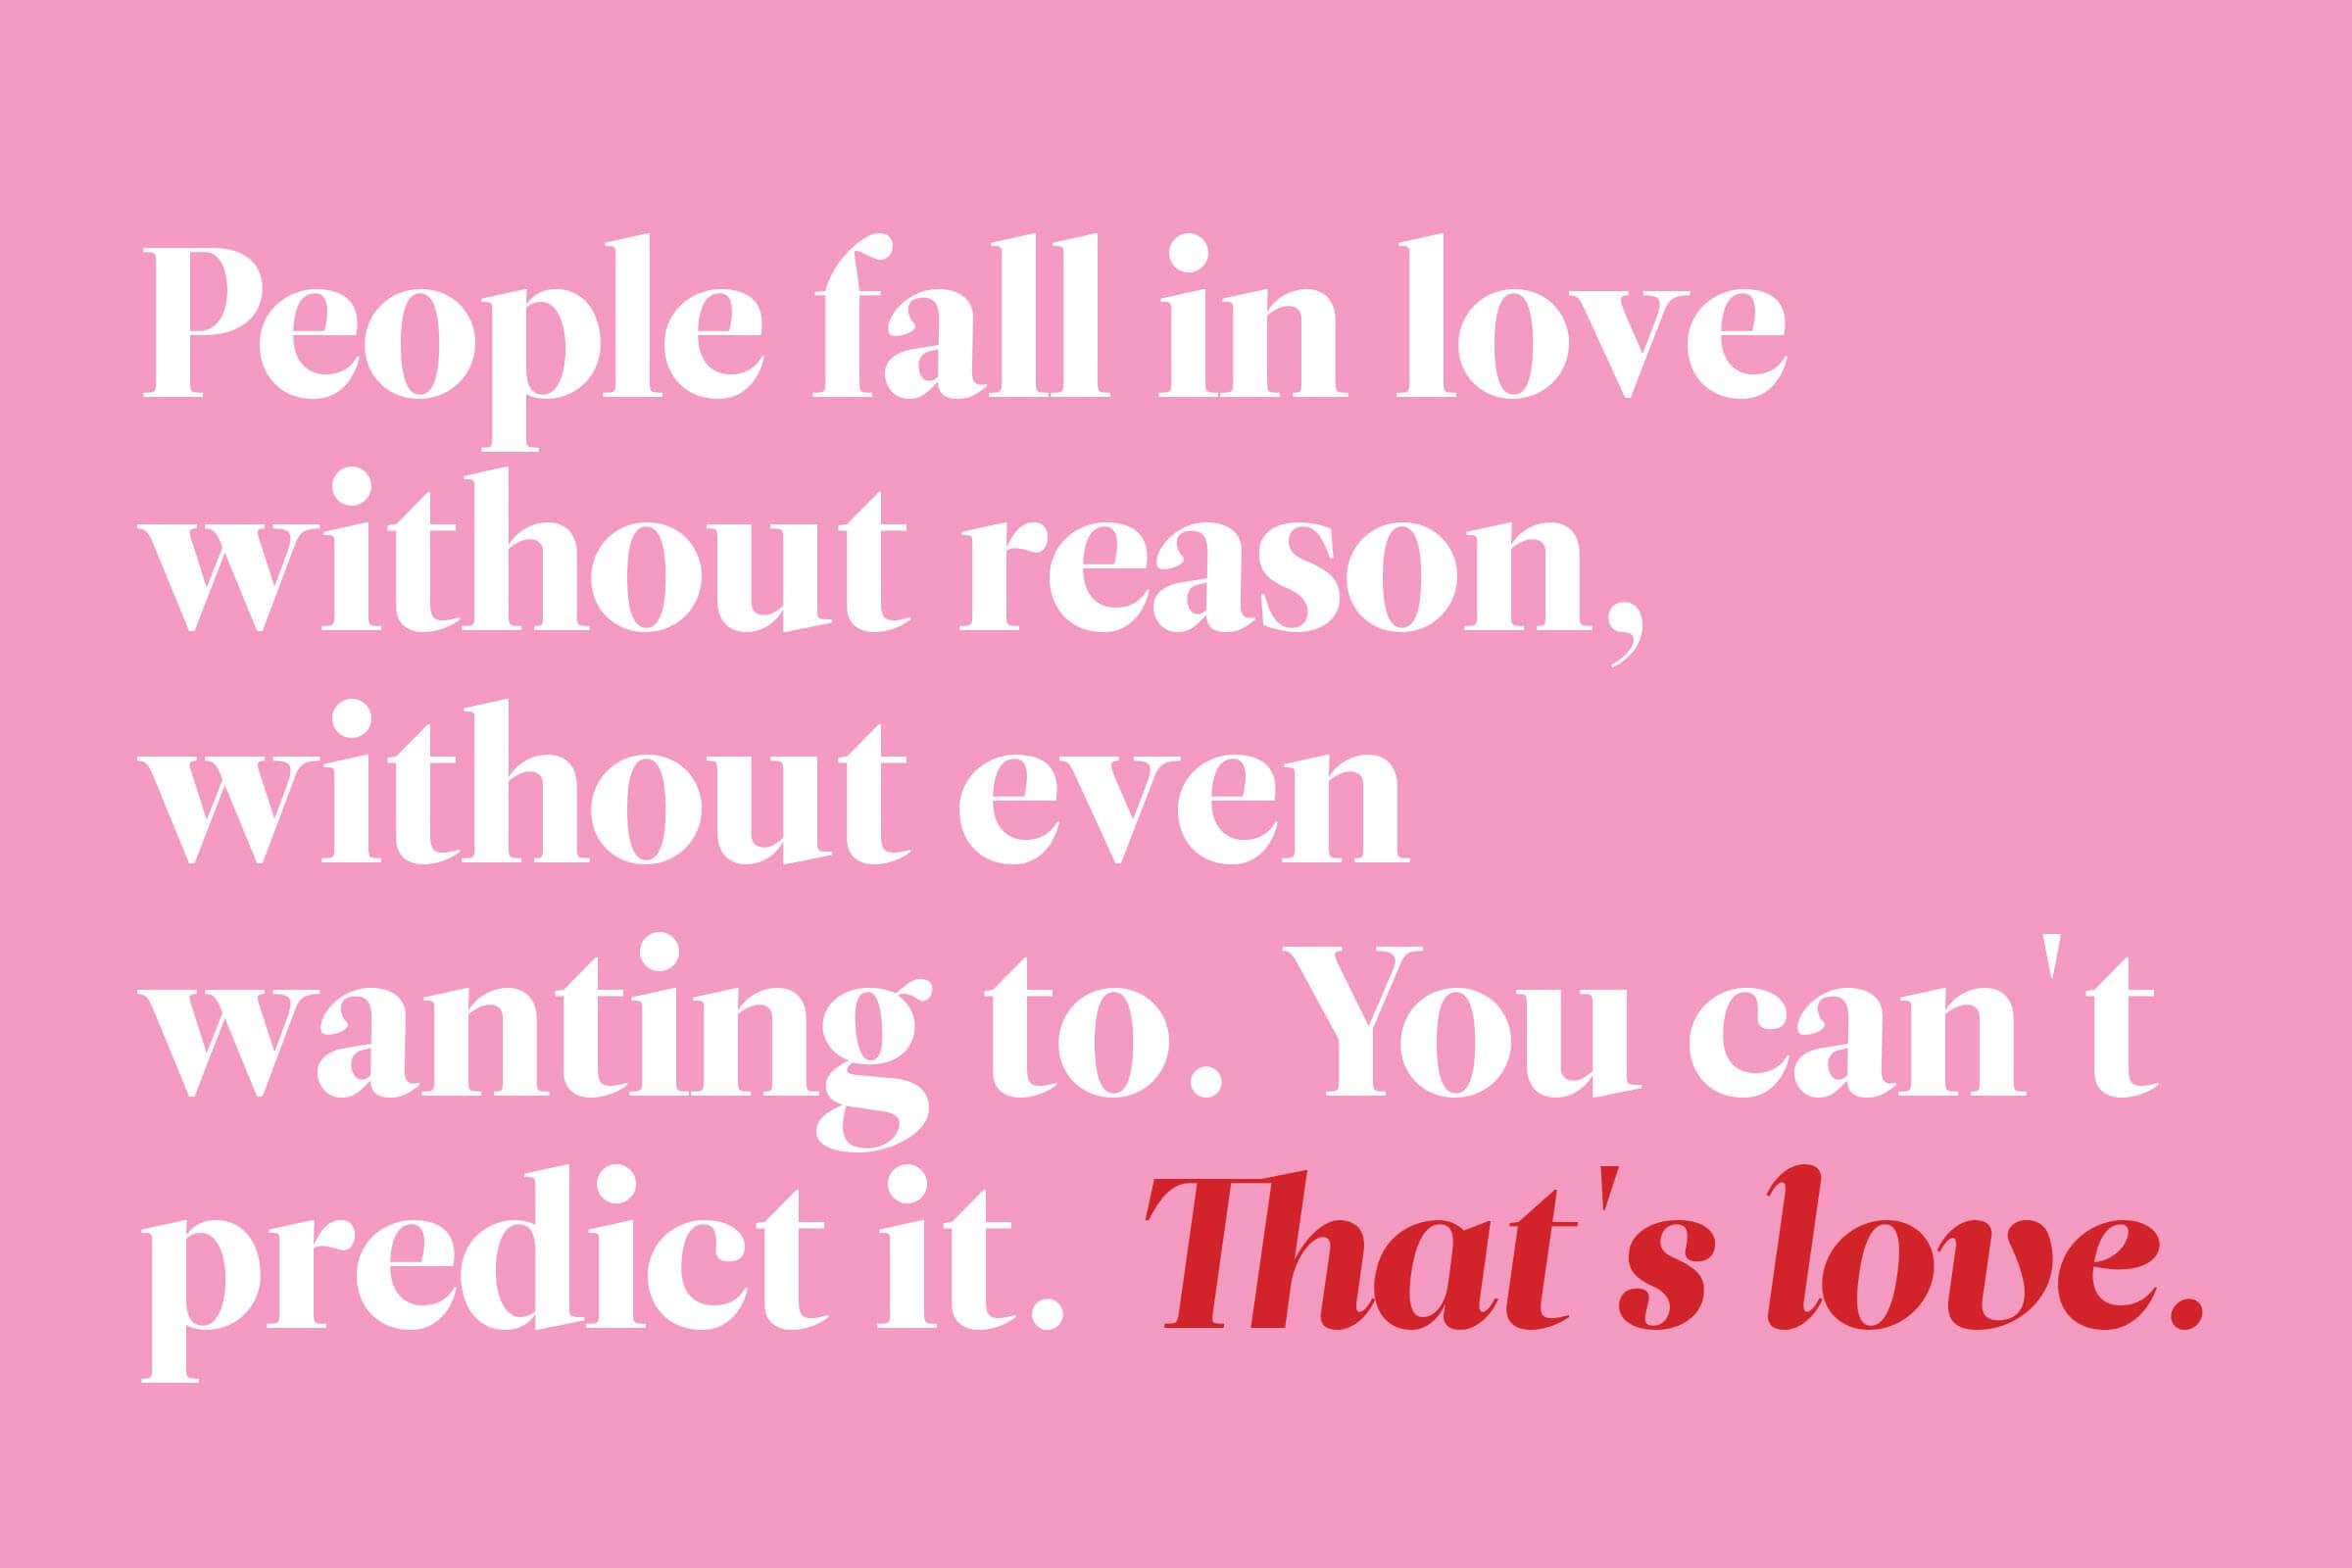 Valentine's Day Quotes You Can Add to Your Cards | Reader's Digest